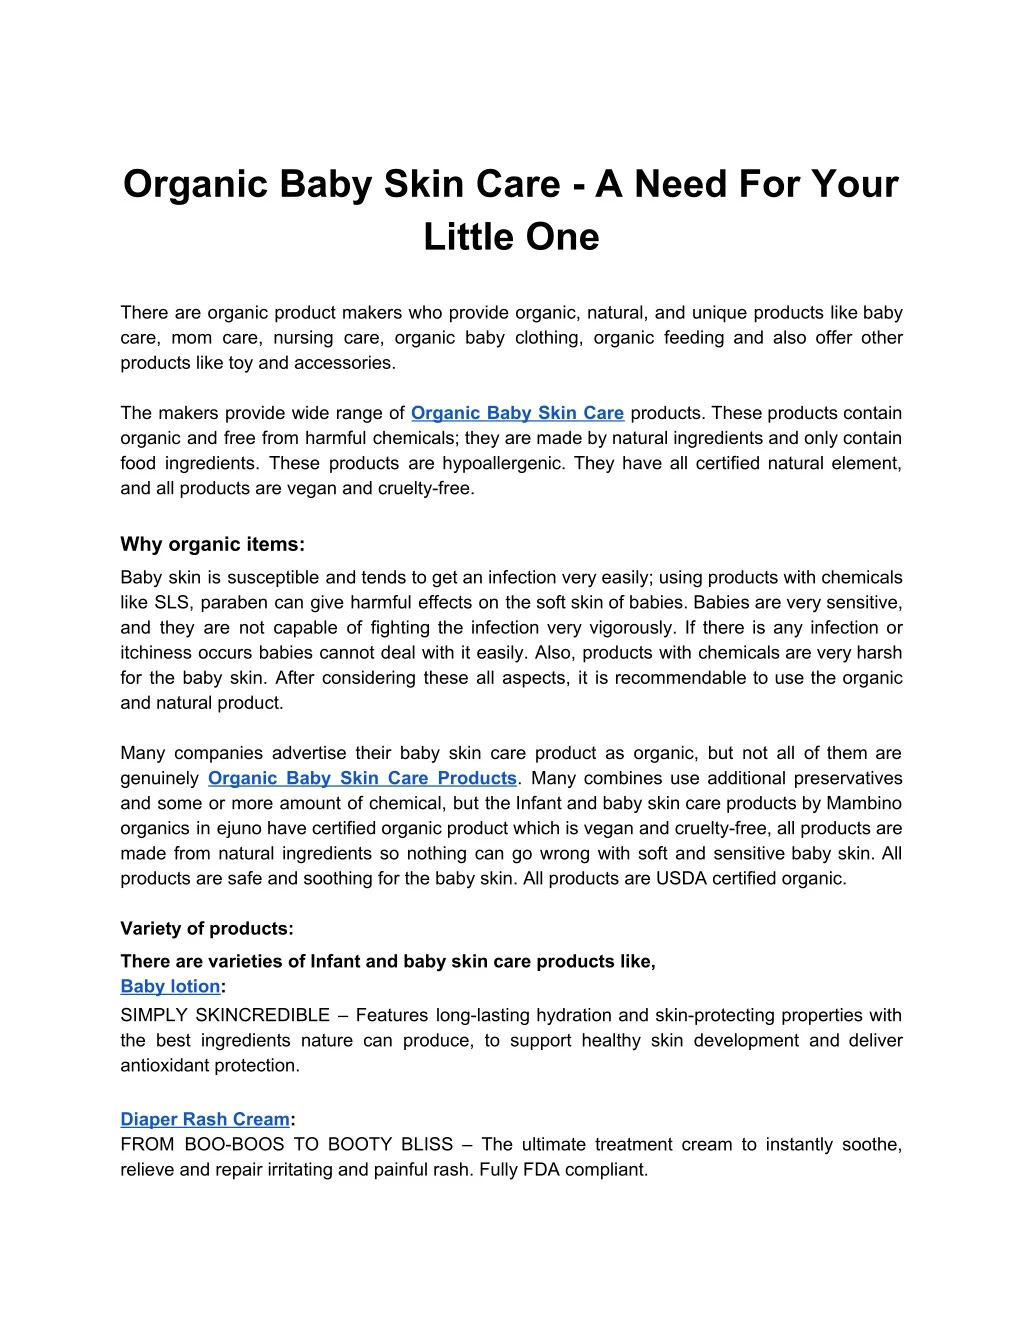 organic baby skin care a need for your little one